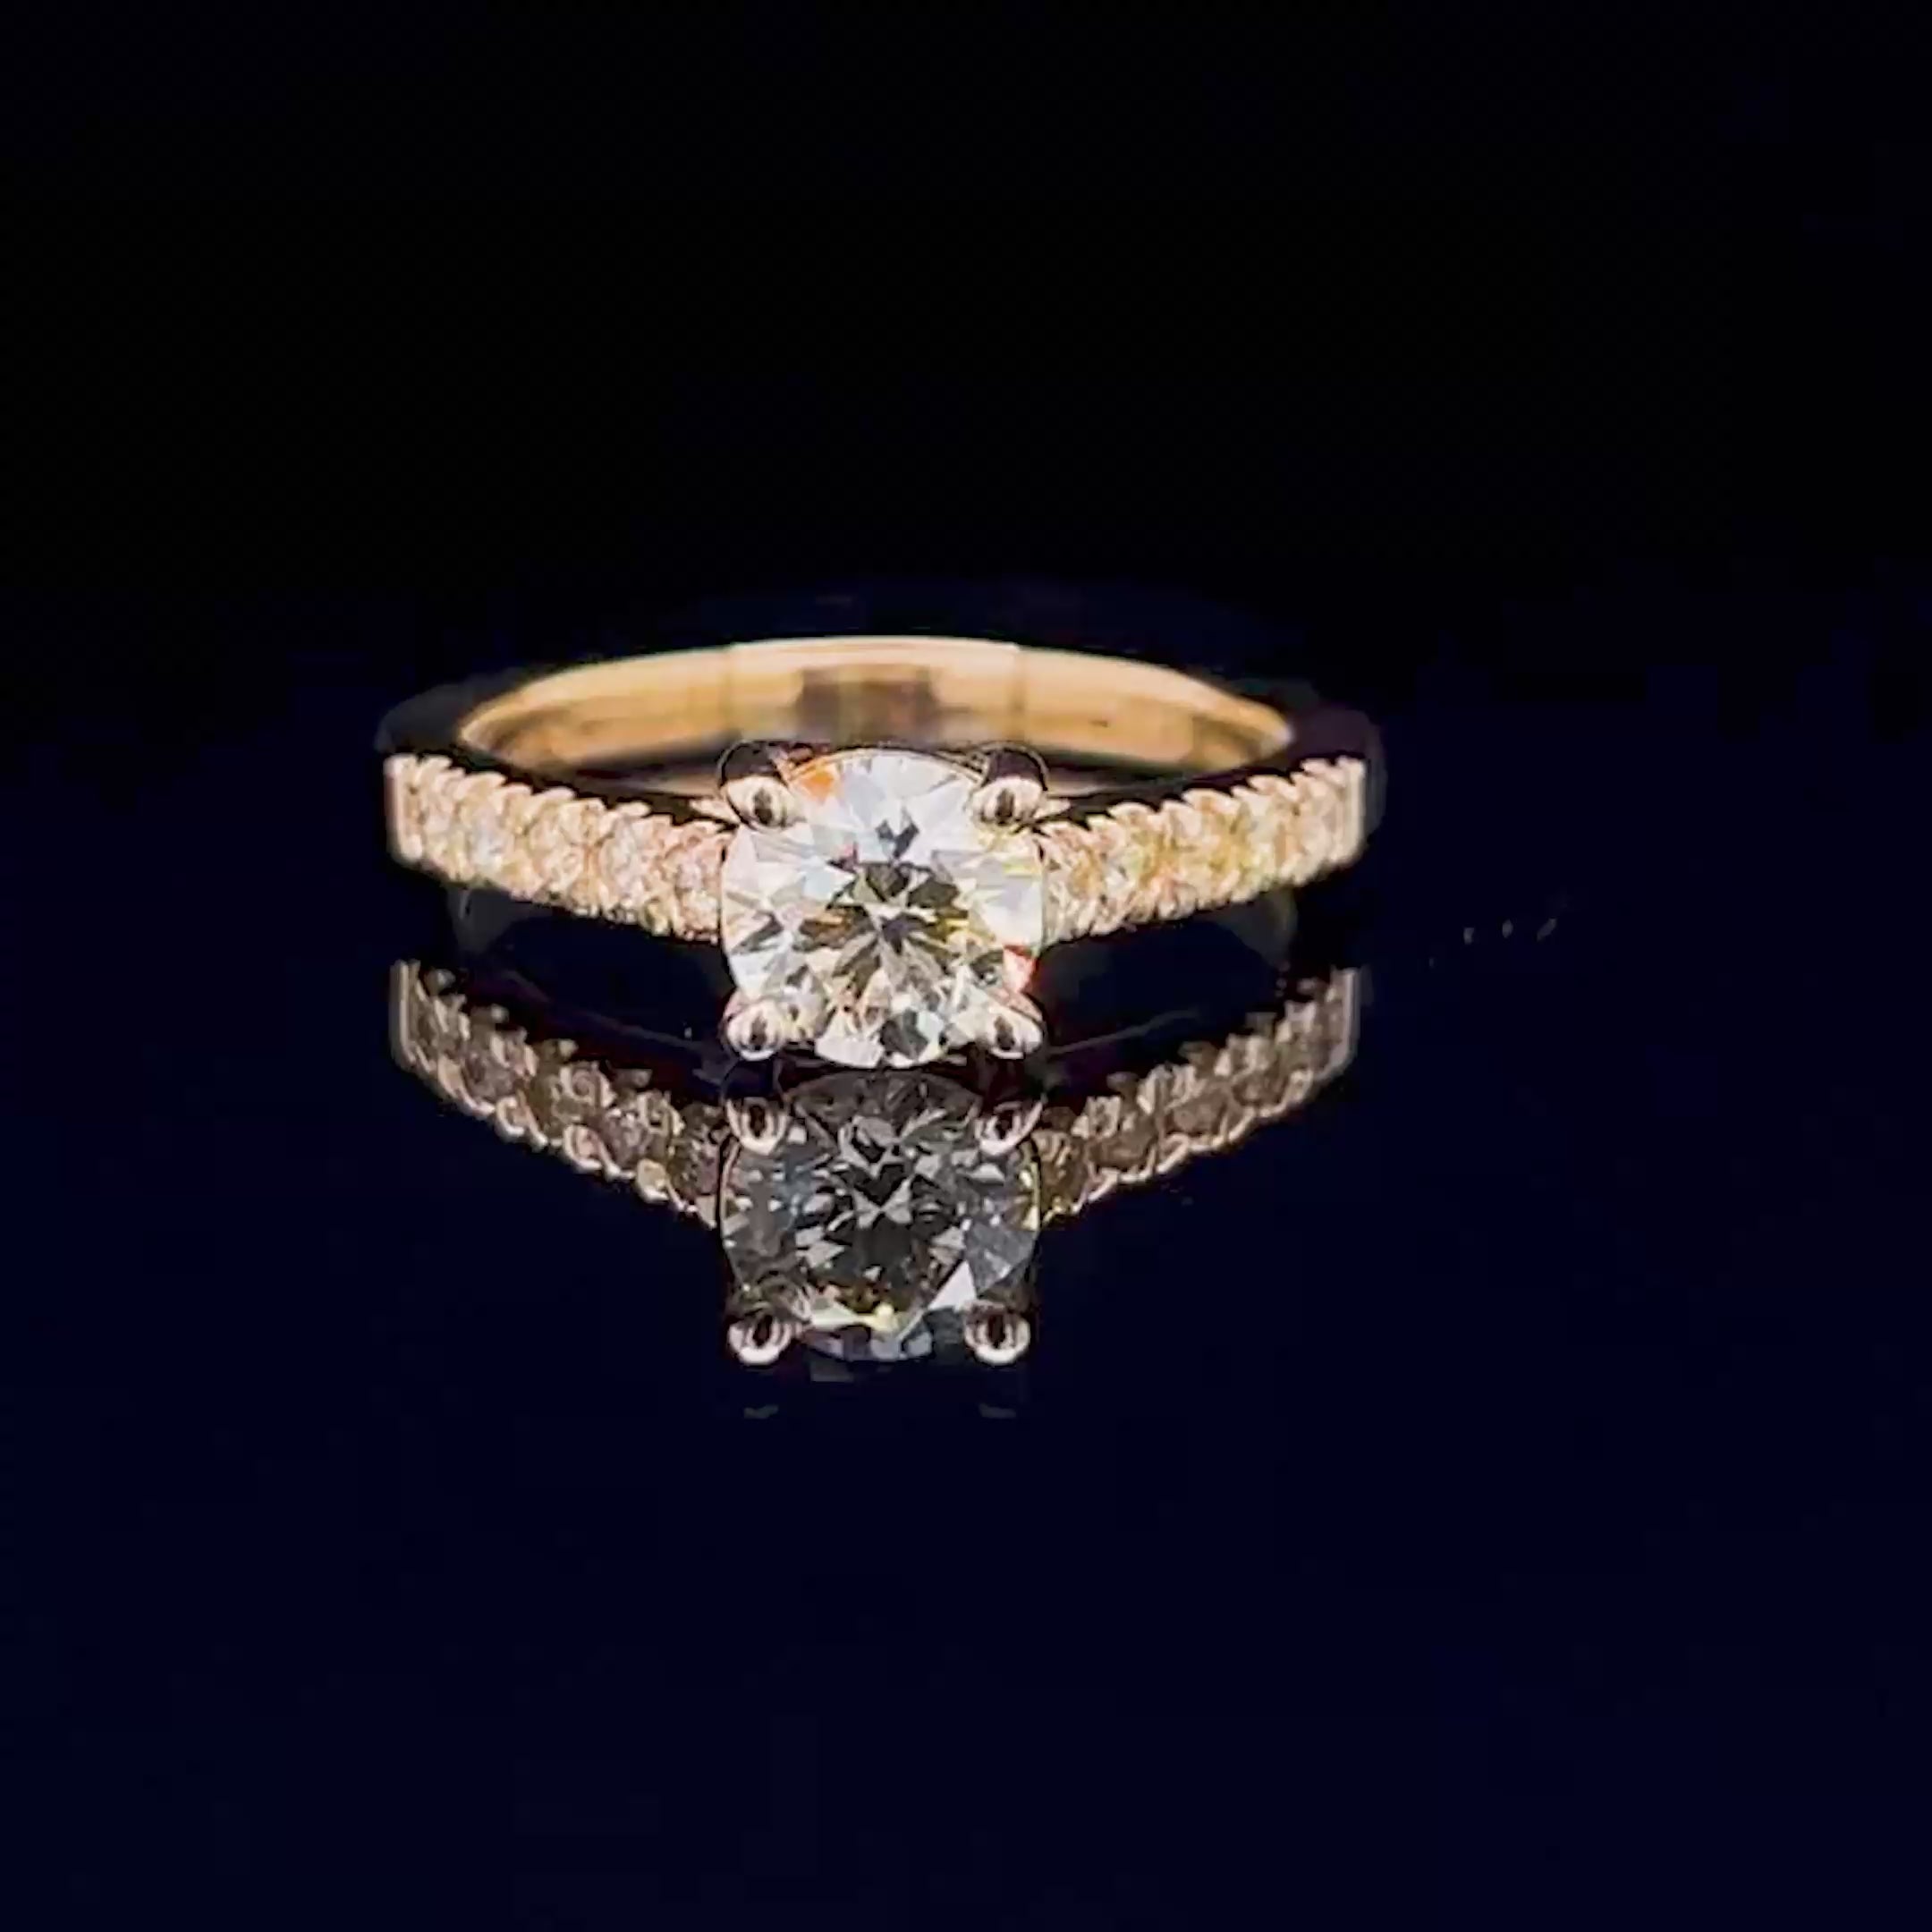 Prestige 1.05CT Round Cut Diamond Engagement Ring in 14KT Yellow Gold